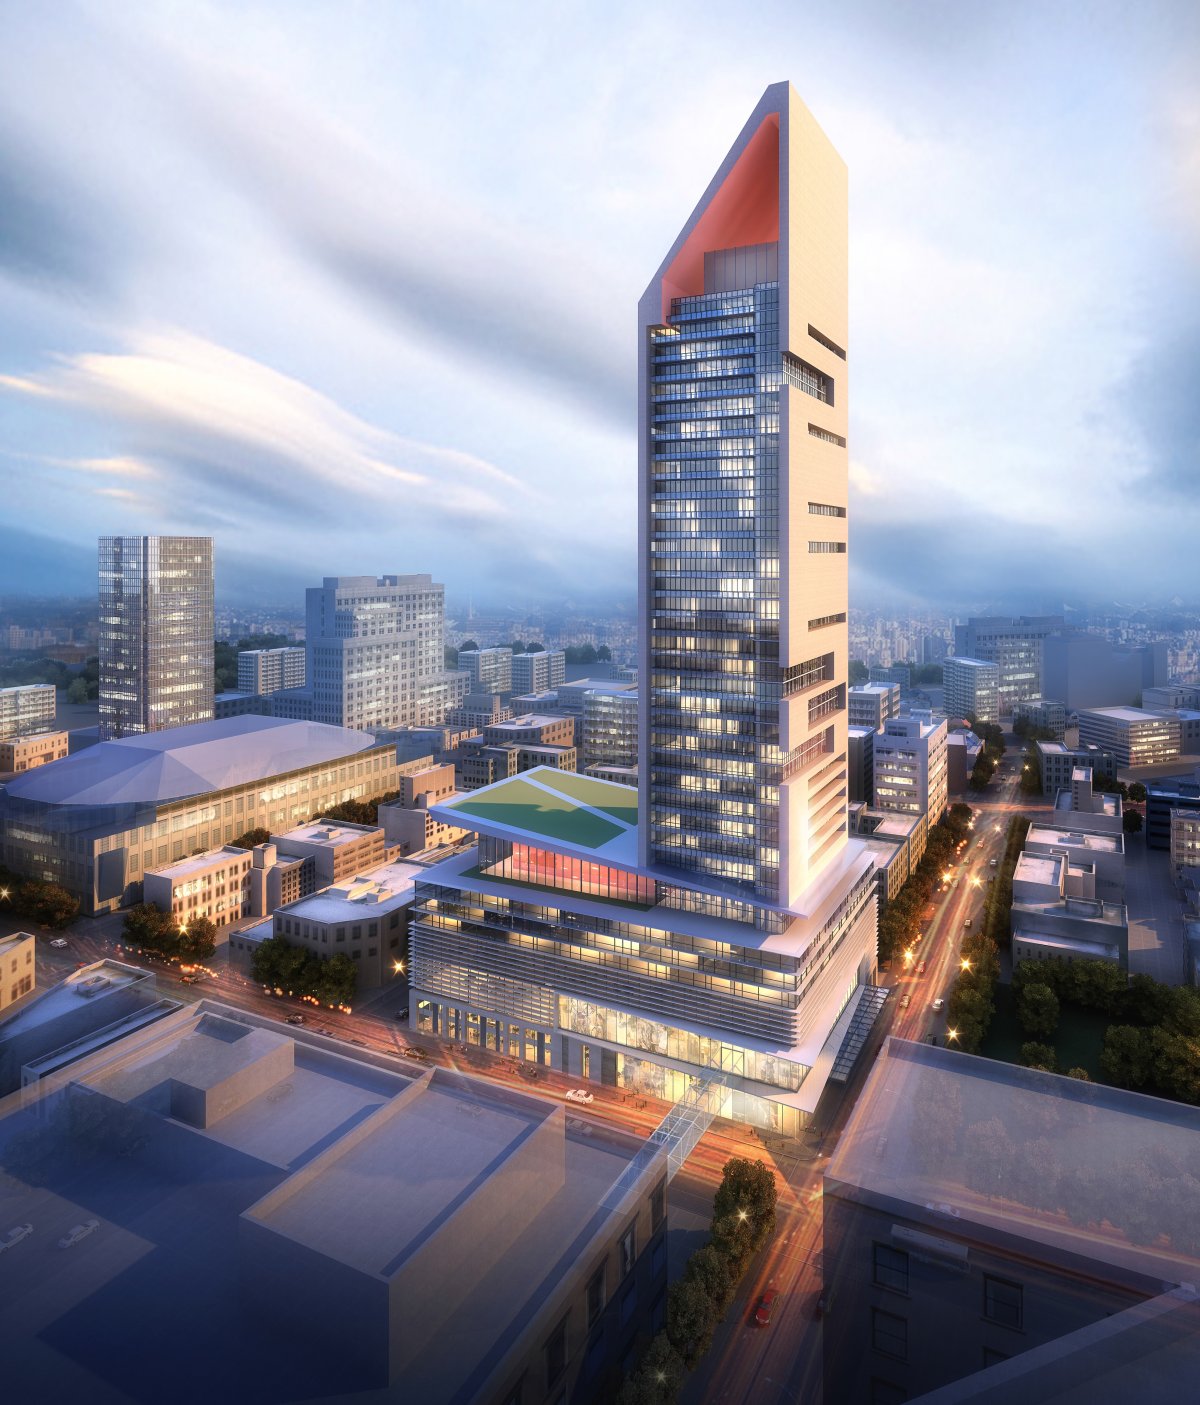 An artist's rendering of the since-cancelled SkyCity development in 2013.